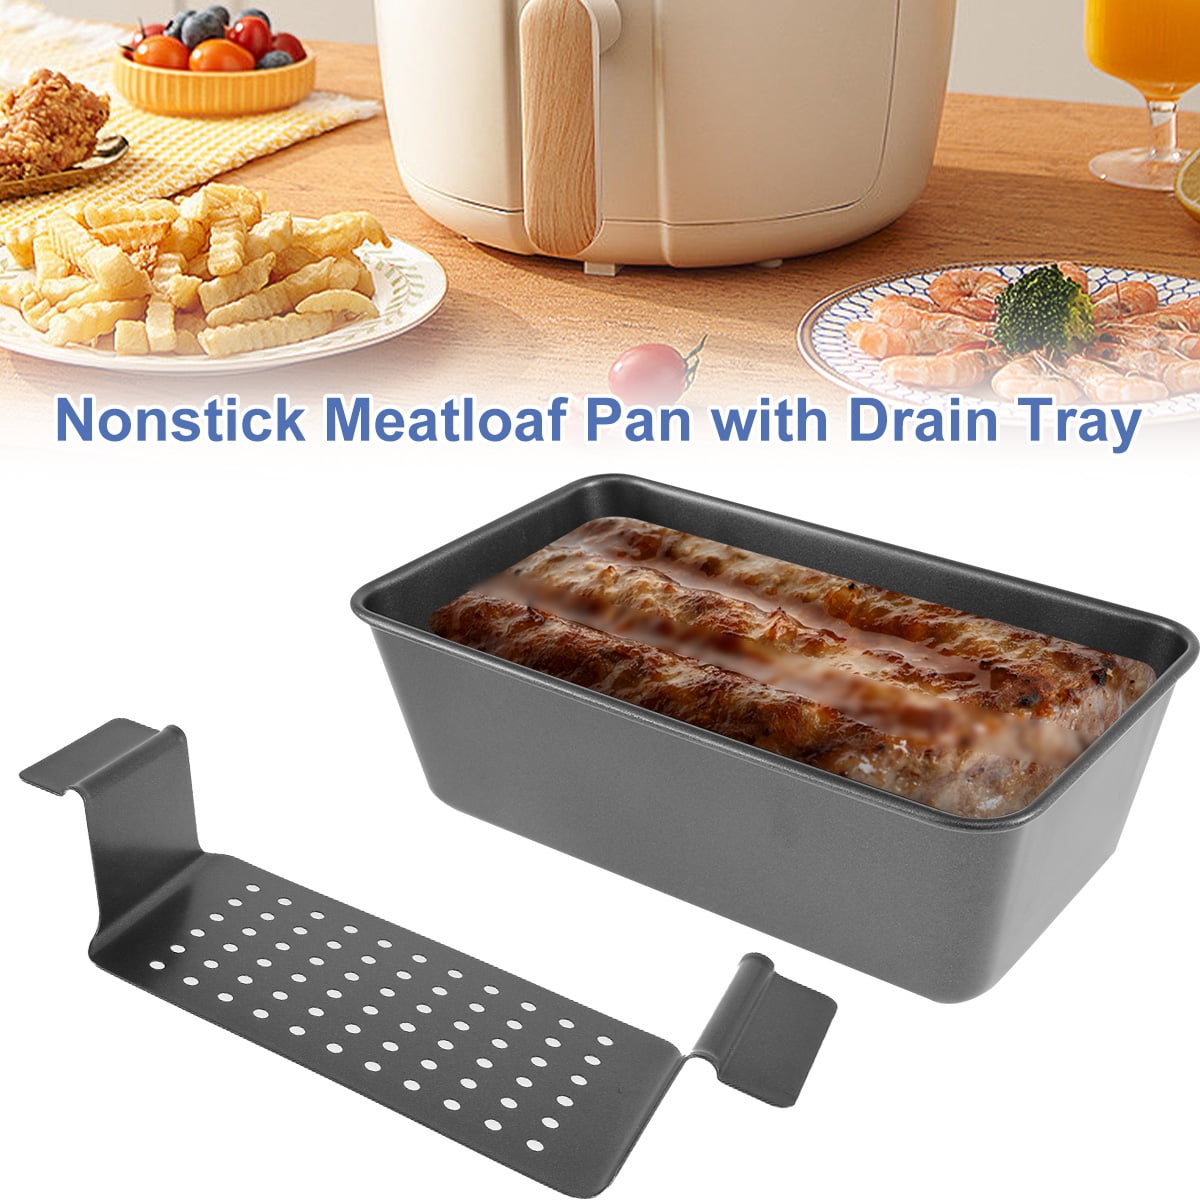 Le Creuset meatloaf pan. I love the wide brim all along the perimeter